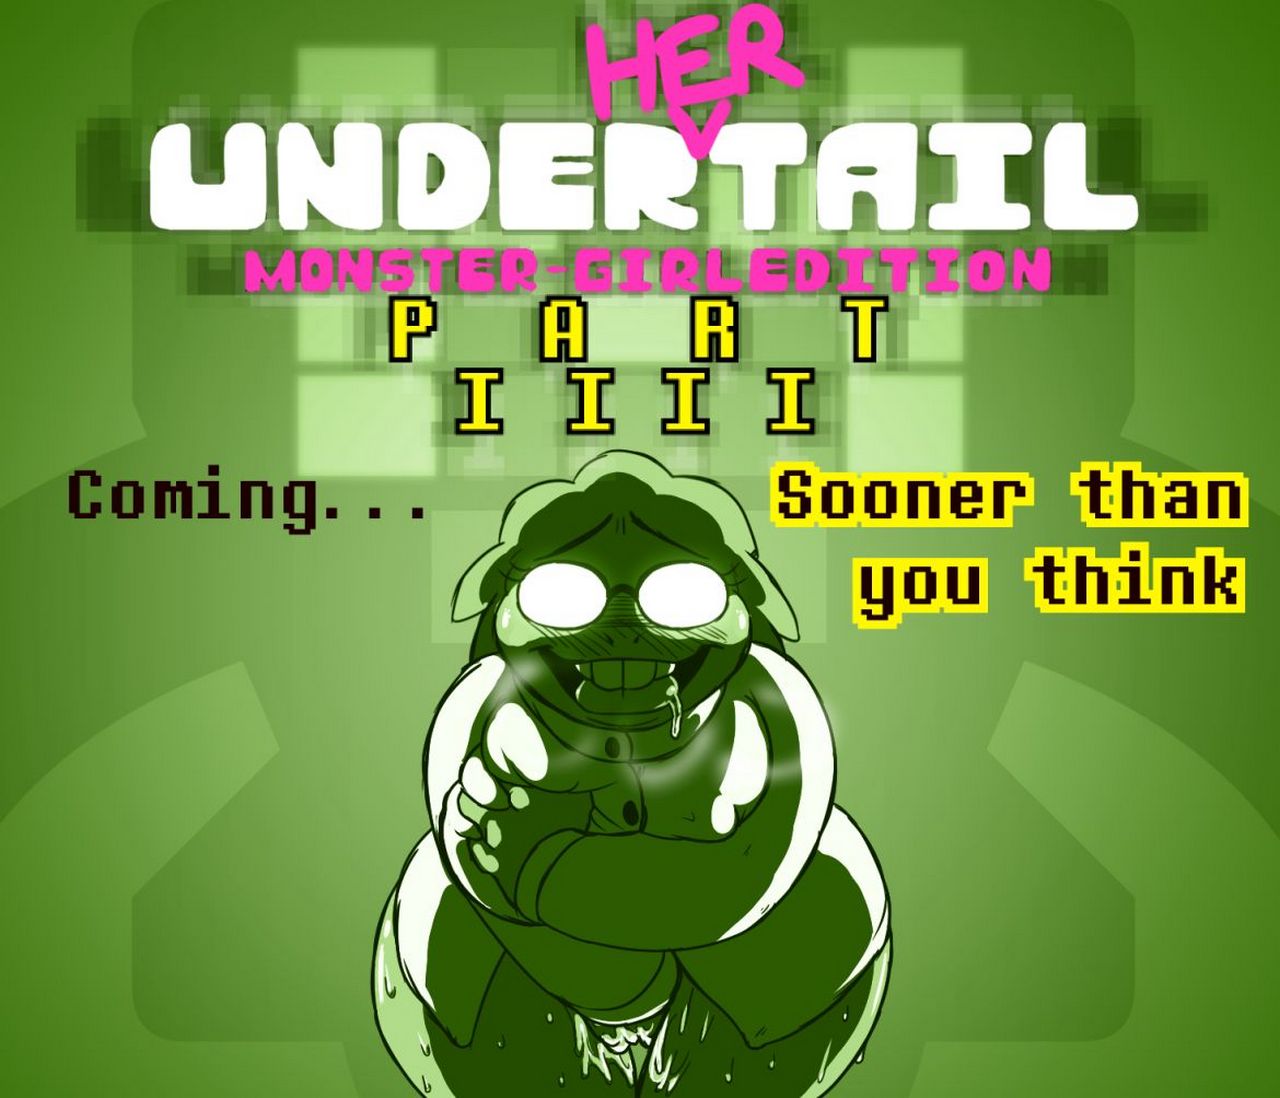 Cover Under(her)tail 4